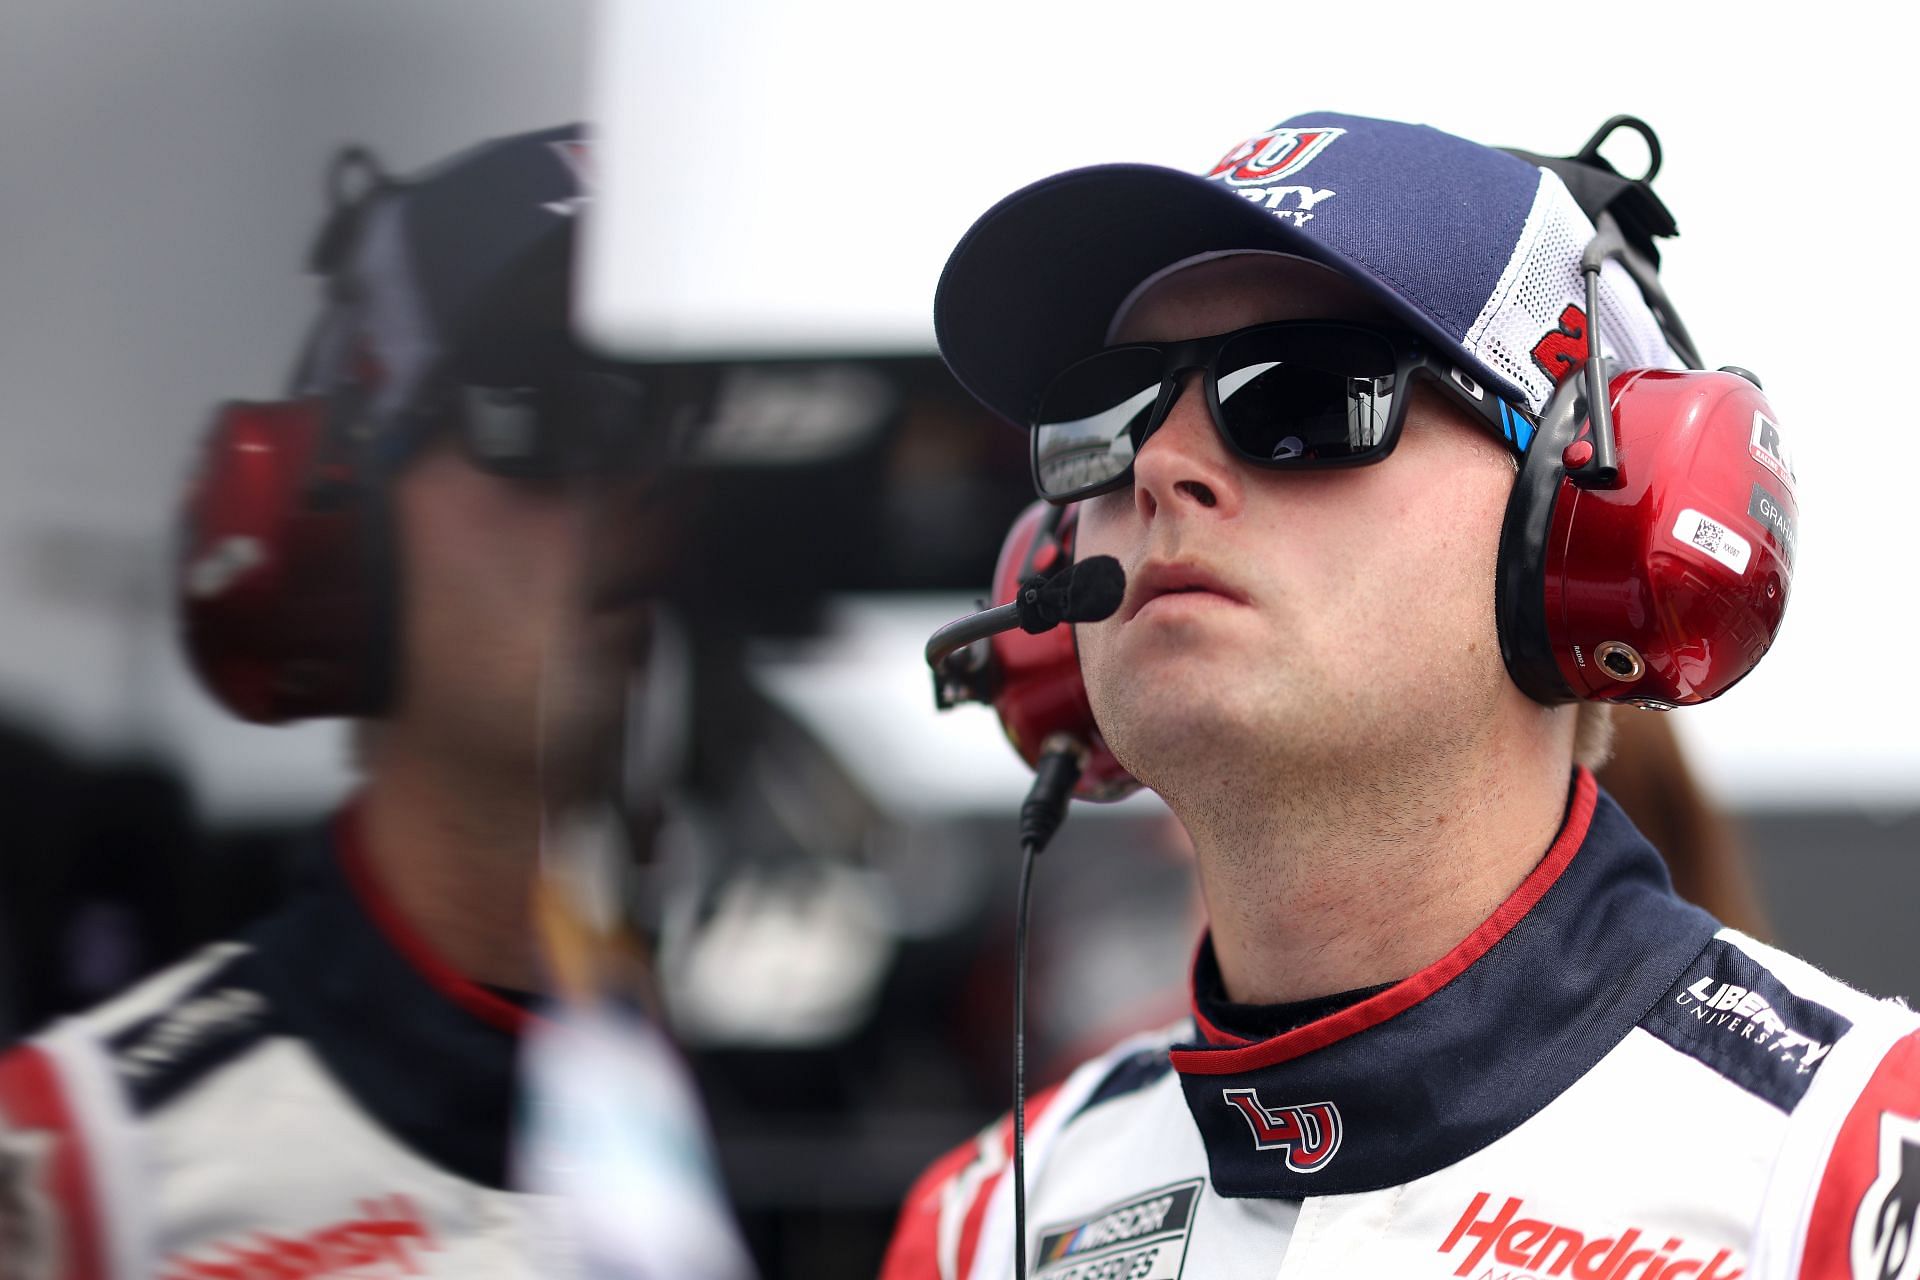 William Byron looks on during practice for the 2022 NASCAR Cup Series Ambetter 301 at New Hampshire Motor Speedway in Loudon, New Hampshire. (Photo by James Gilbert/Getty Images)